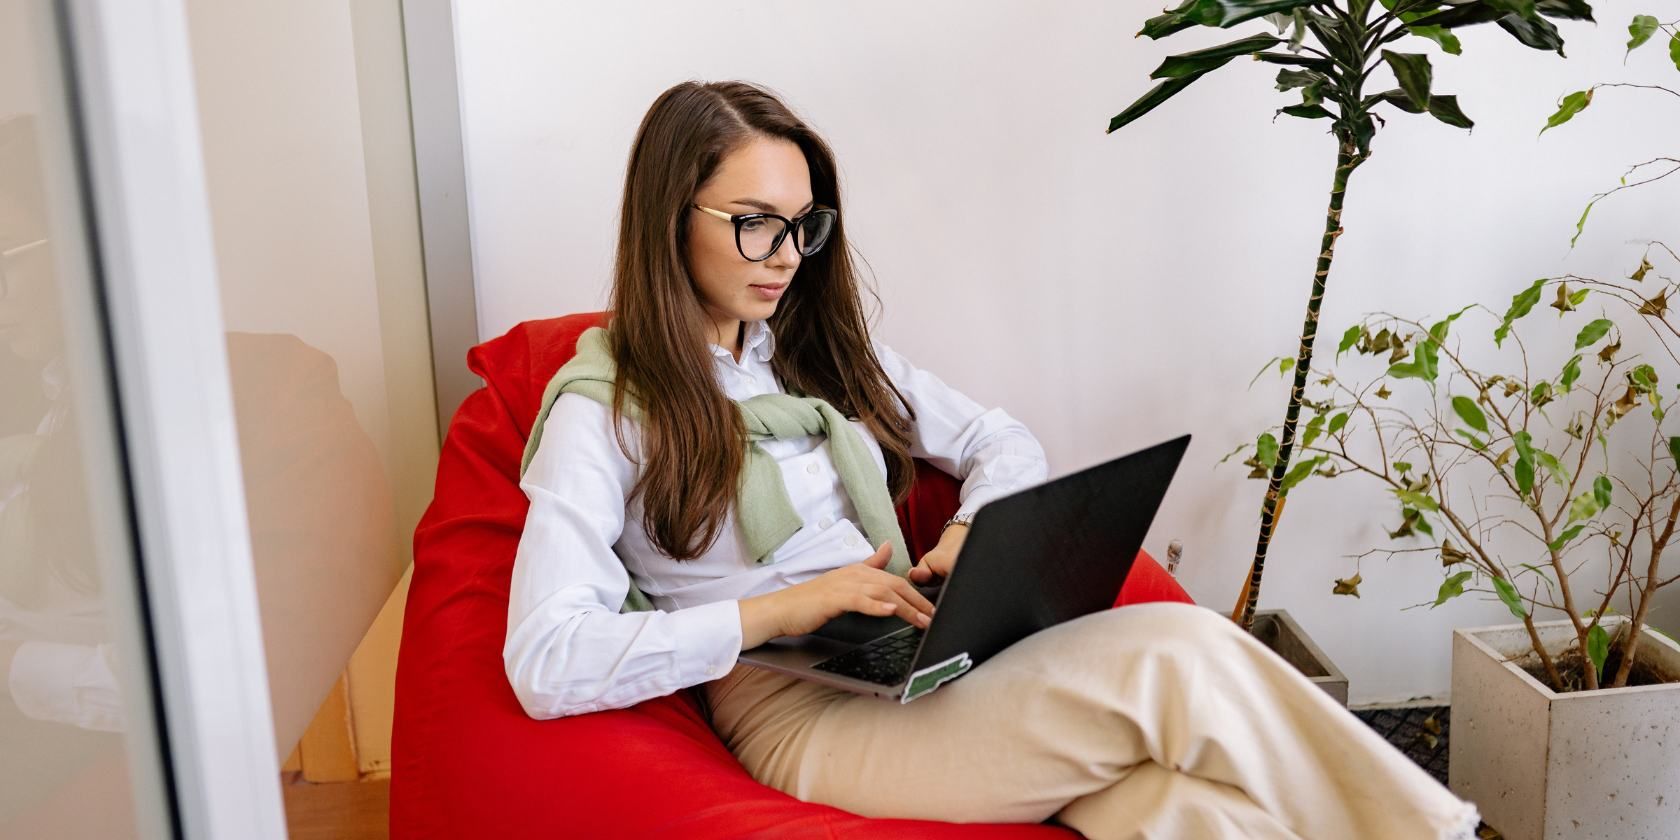 Dark haired woman with glasses typing on laptop and sitting on red bean bag